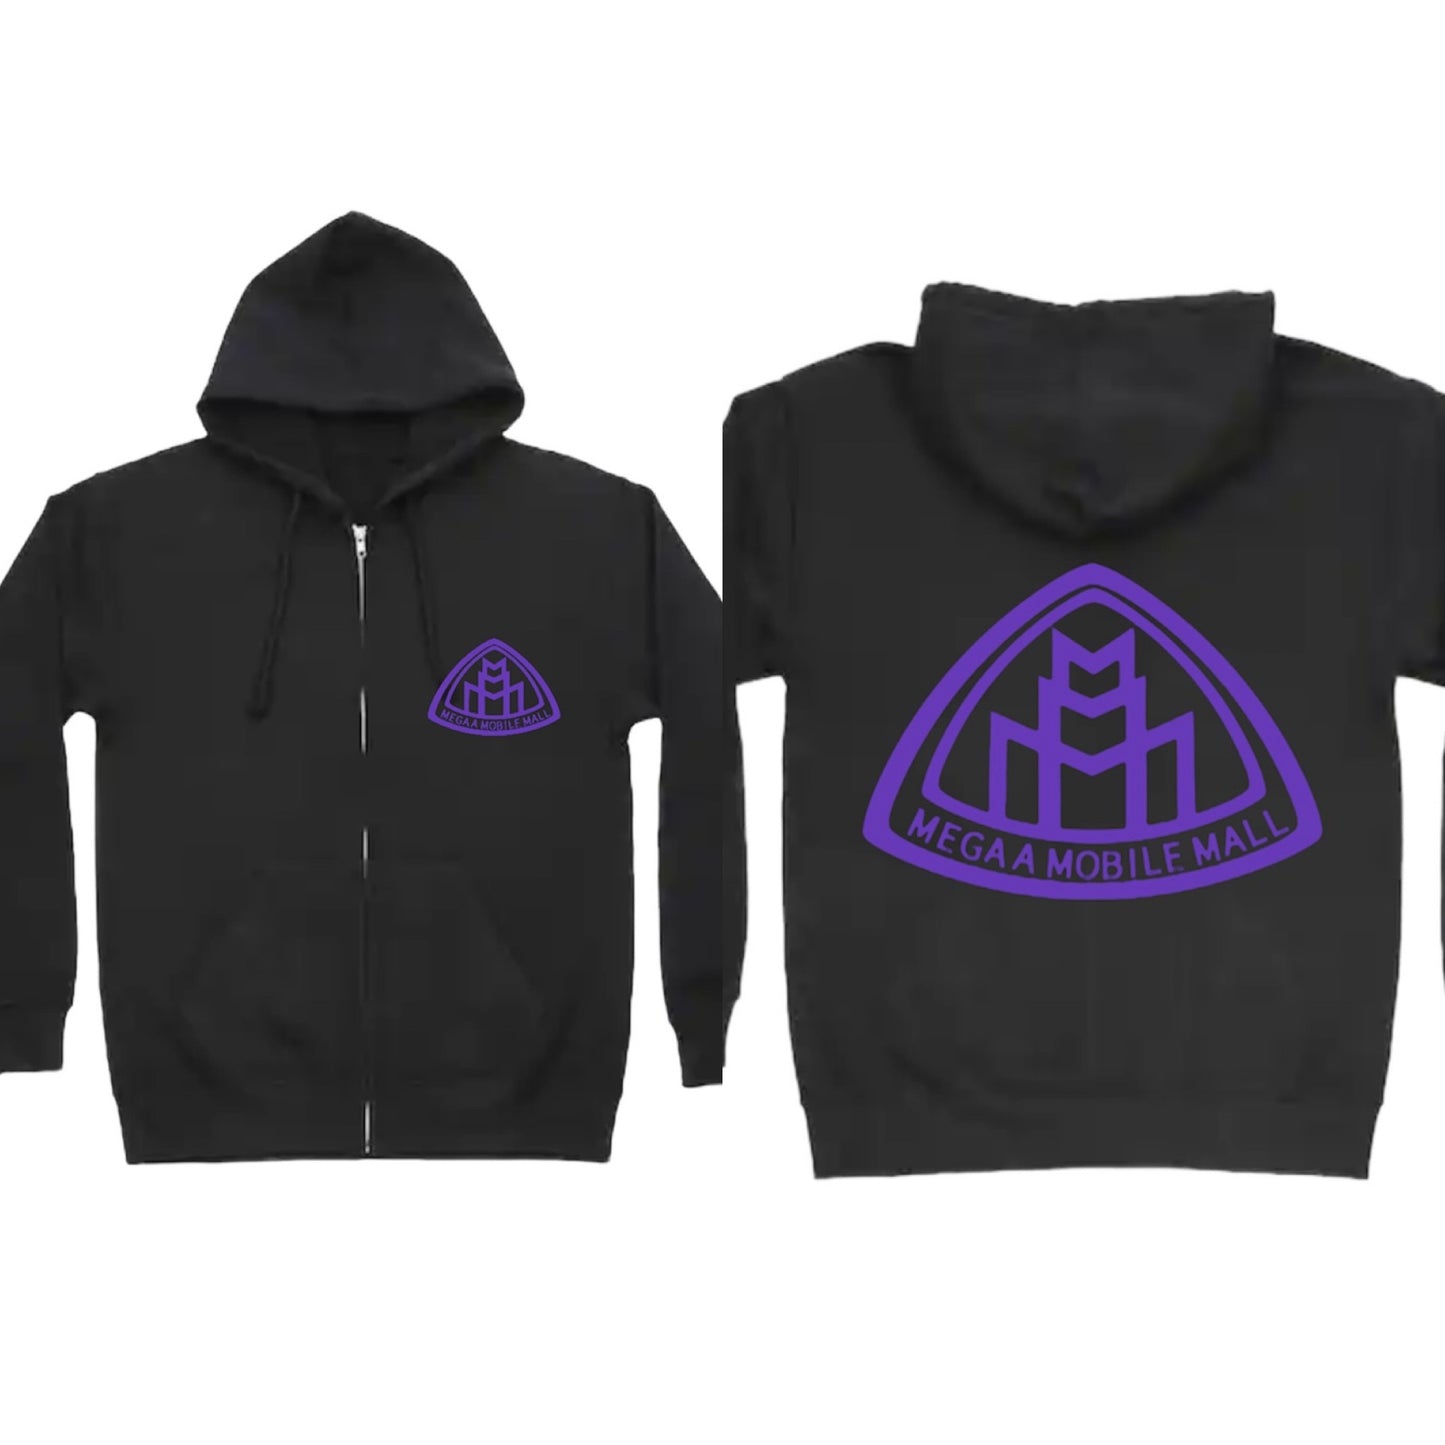 megaamobilemall black zip up hoodie with purple logo color